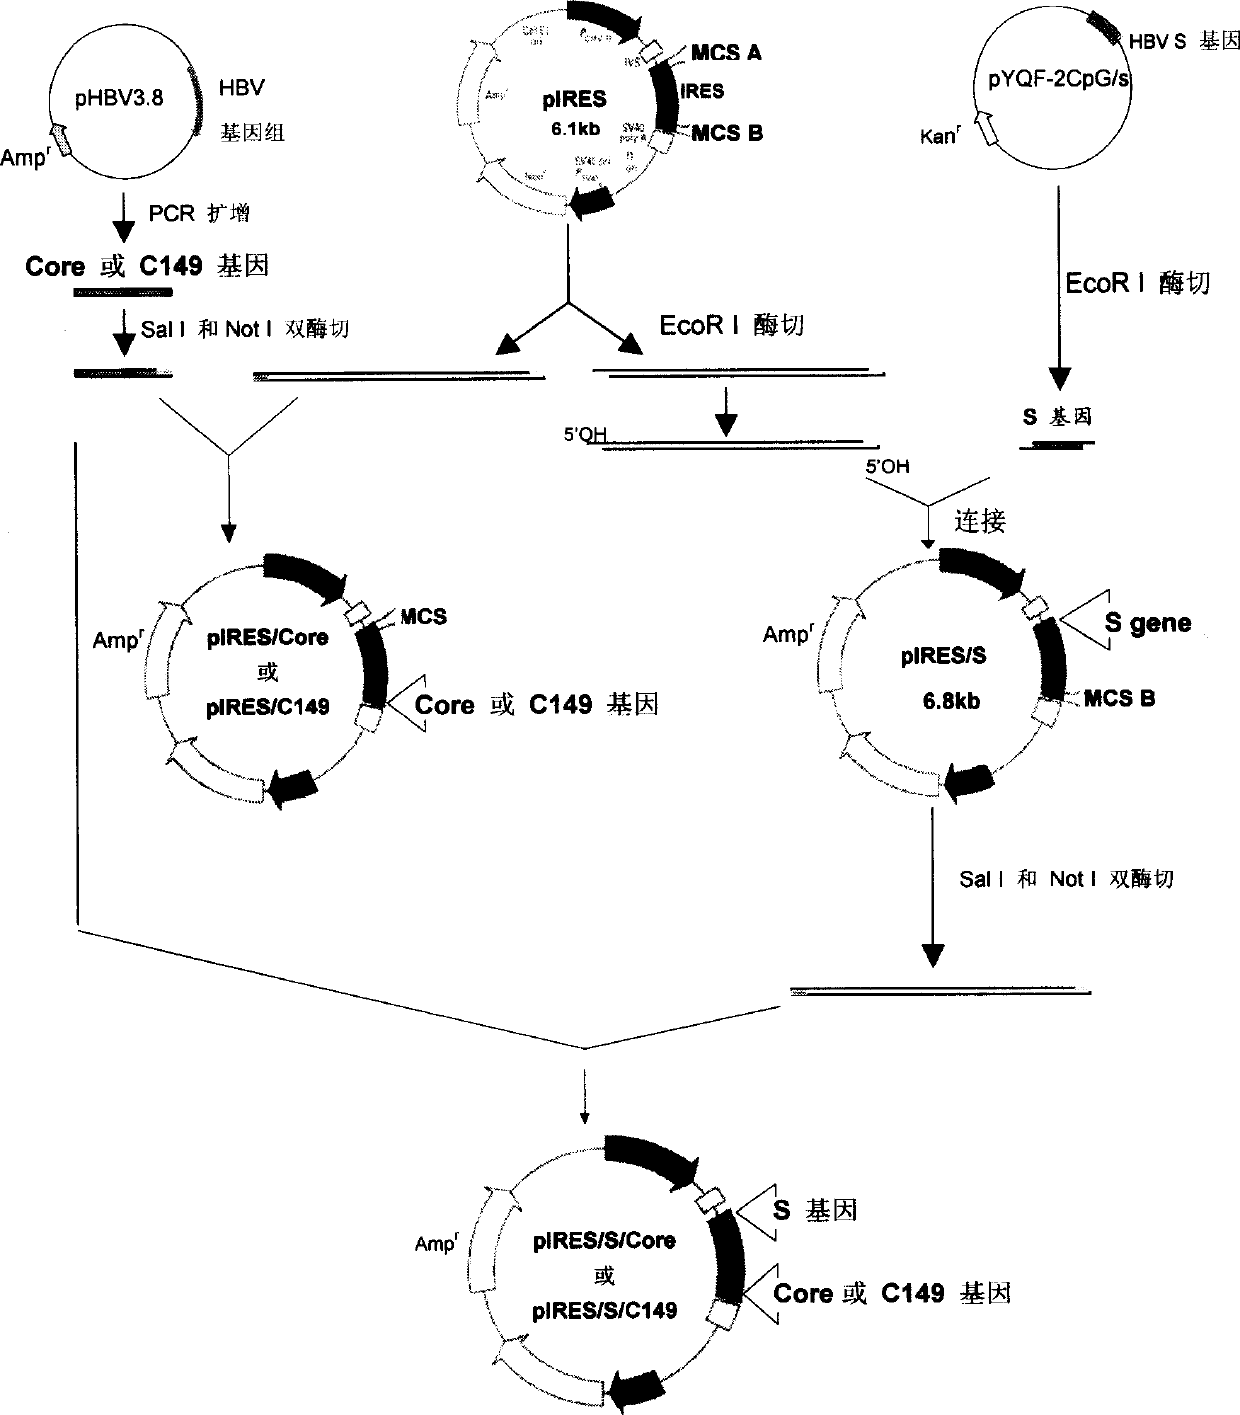 Method for inducing immune response using HBs DNA vaccine inoculated by HBV core protein reinforcing gene gun